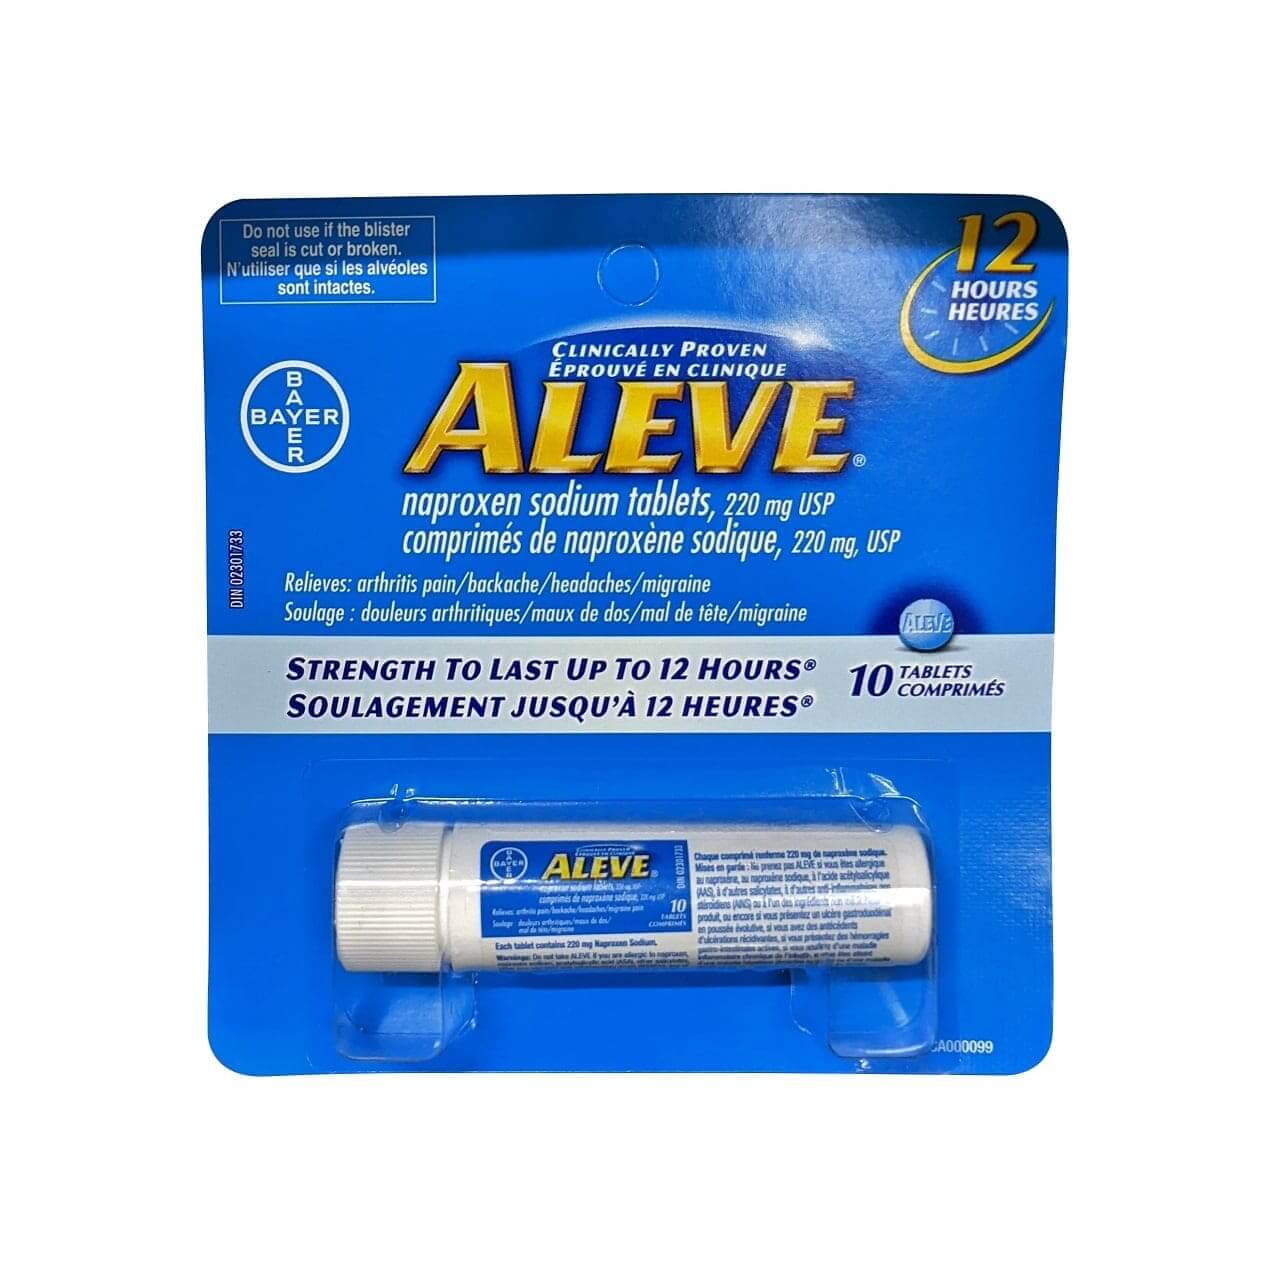 Product label for Aleve Naproxen Sodium 220mg (10 caplets)